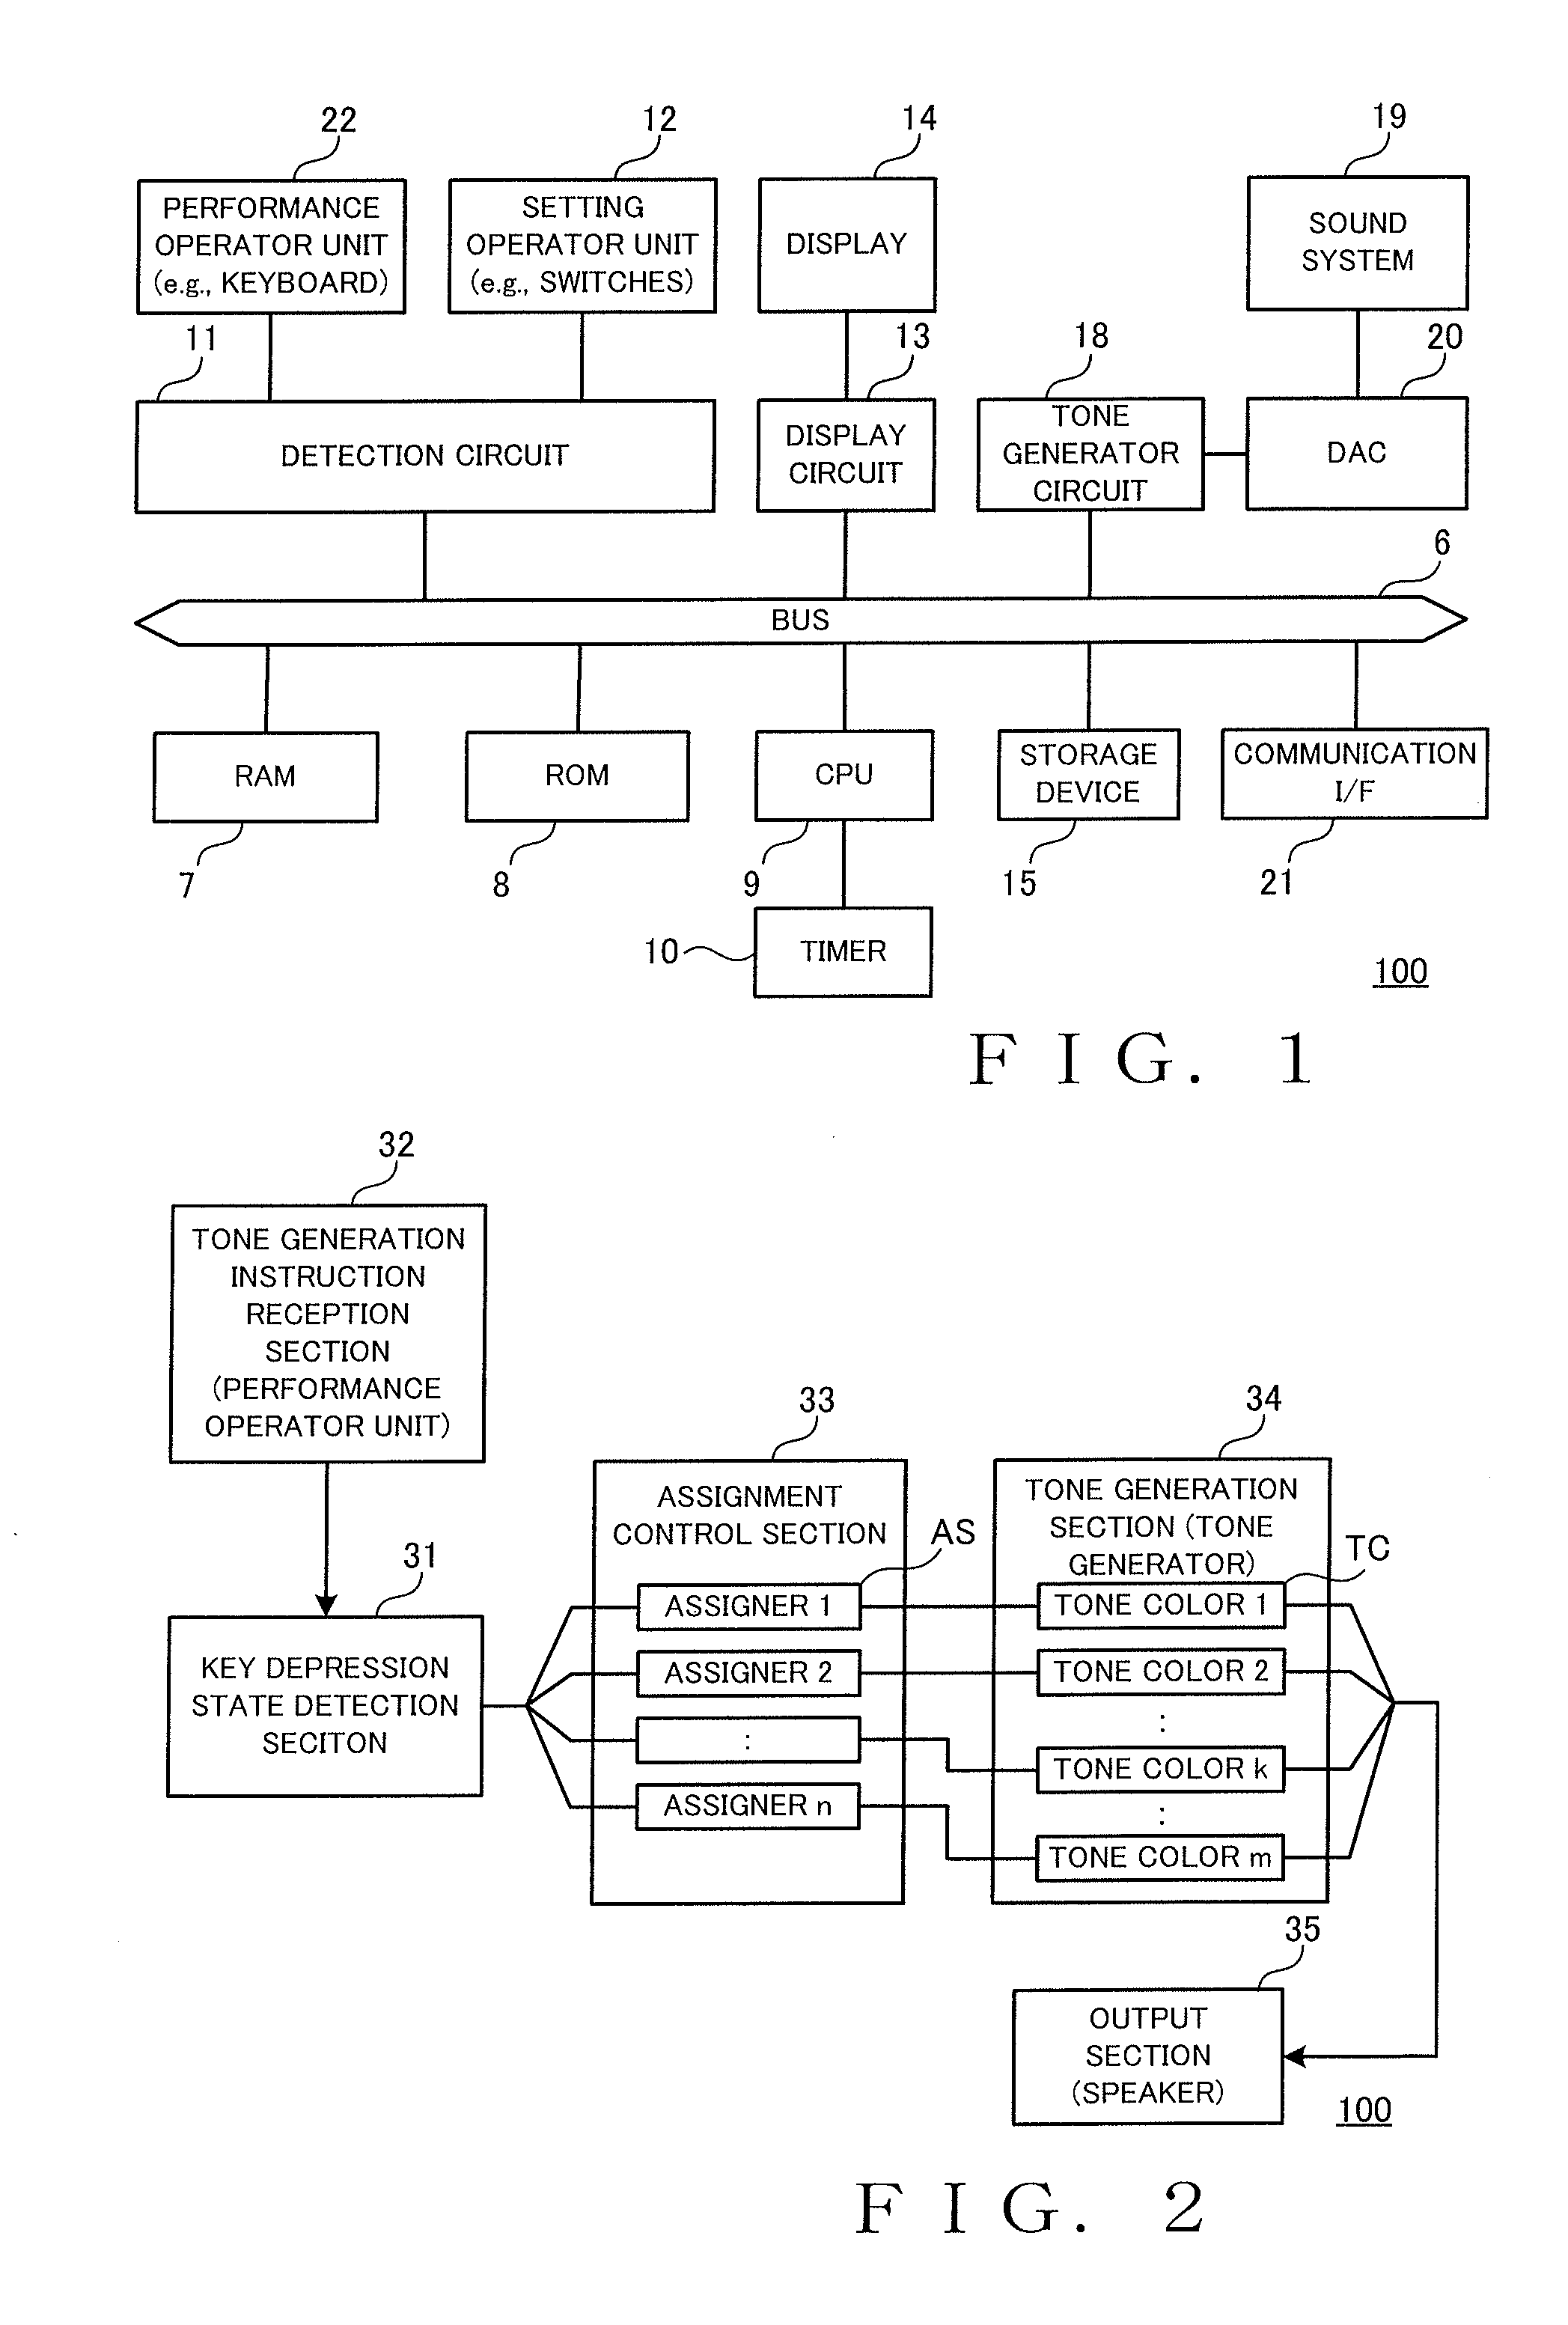 Tone generation assigning apparatus and method